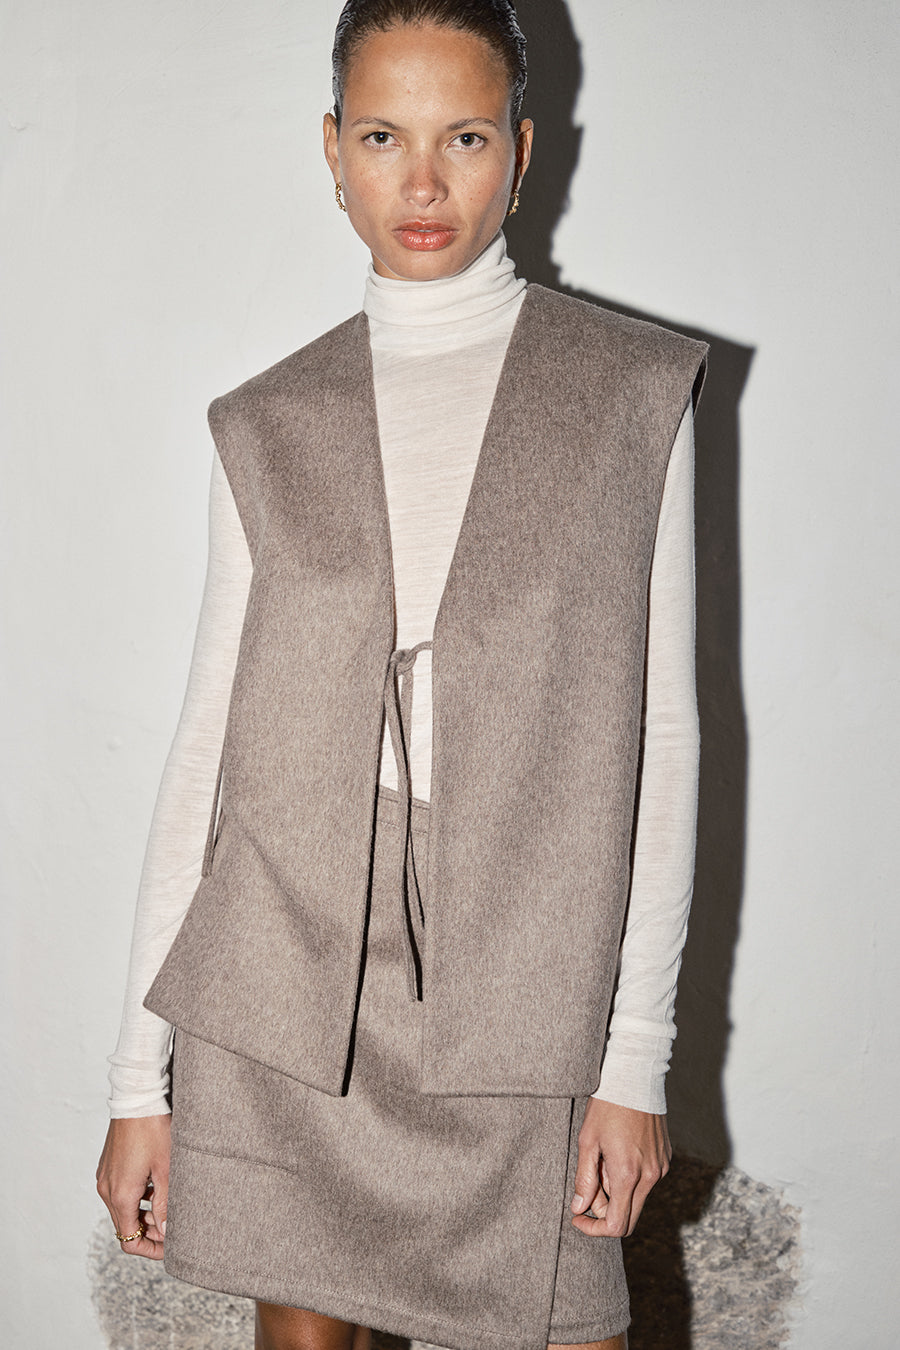 Taupe Loden Wool Vest